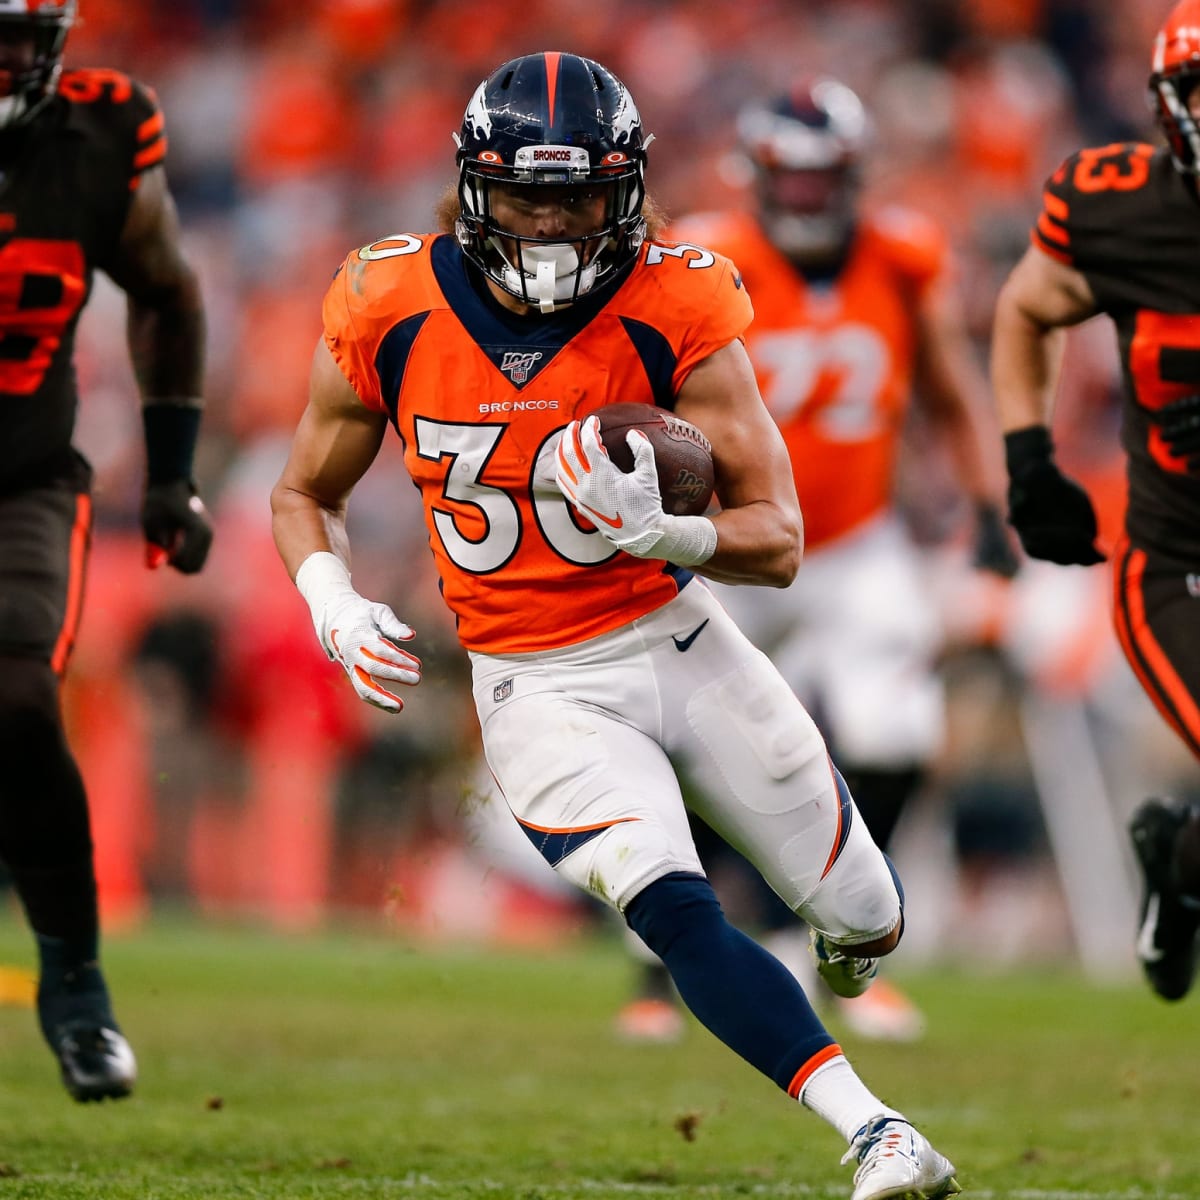 Phillip Lindsay makes it known he wants to play for the Broncos again -  Denver Sports